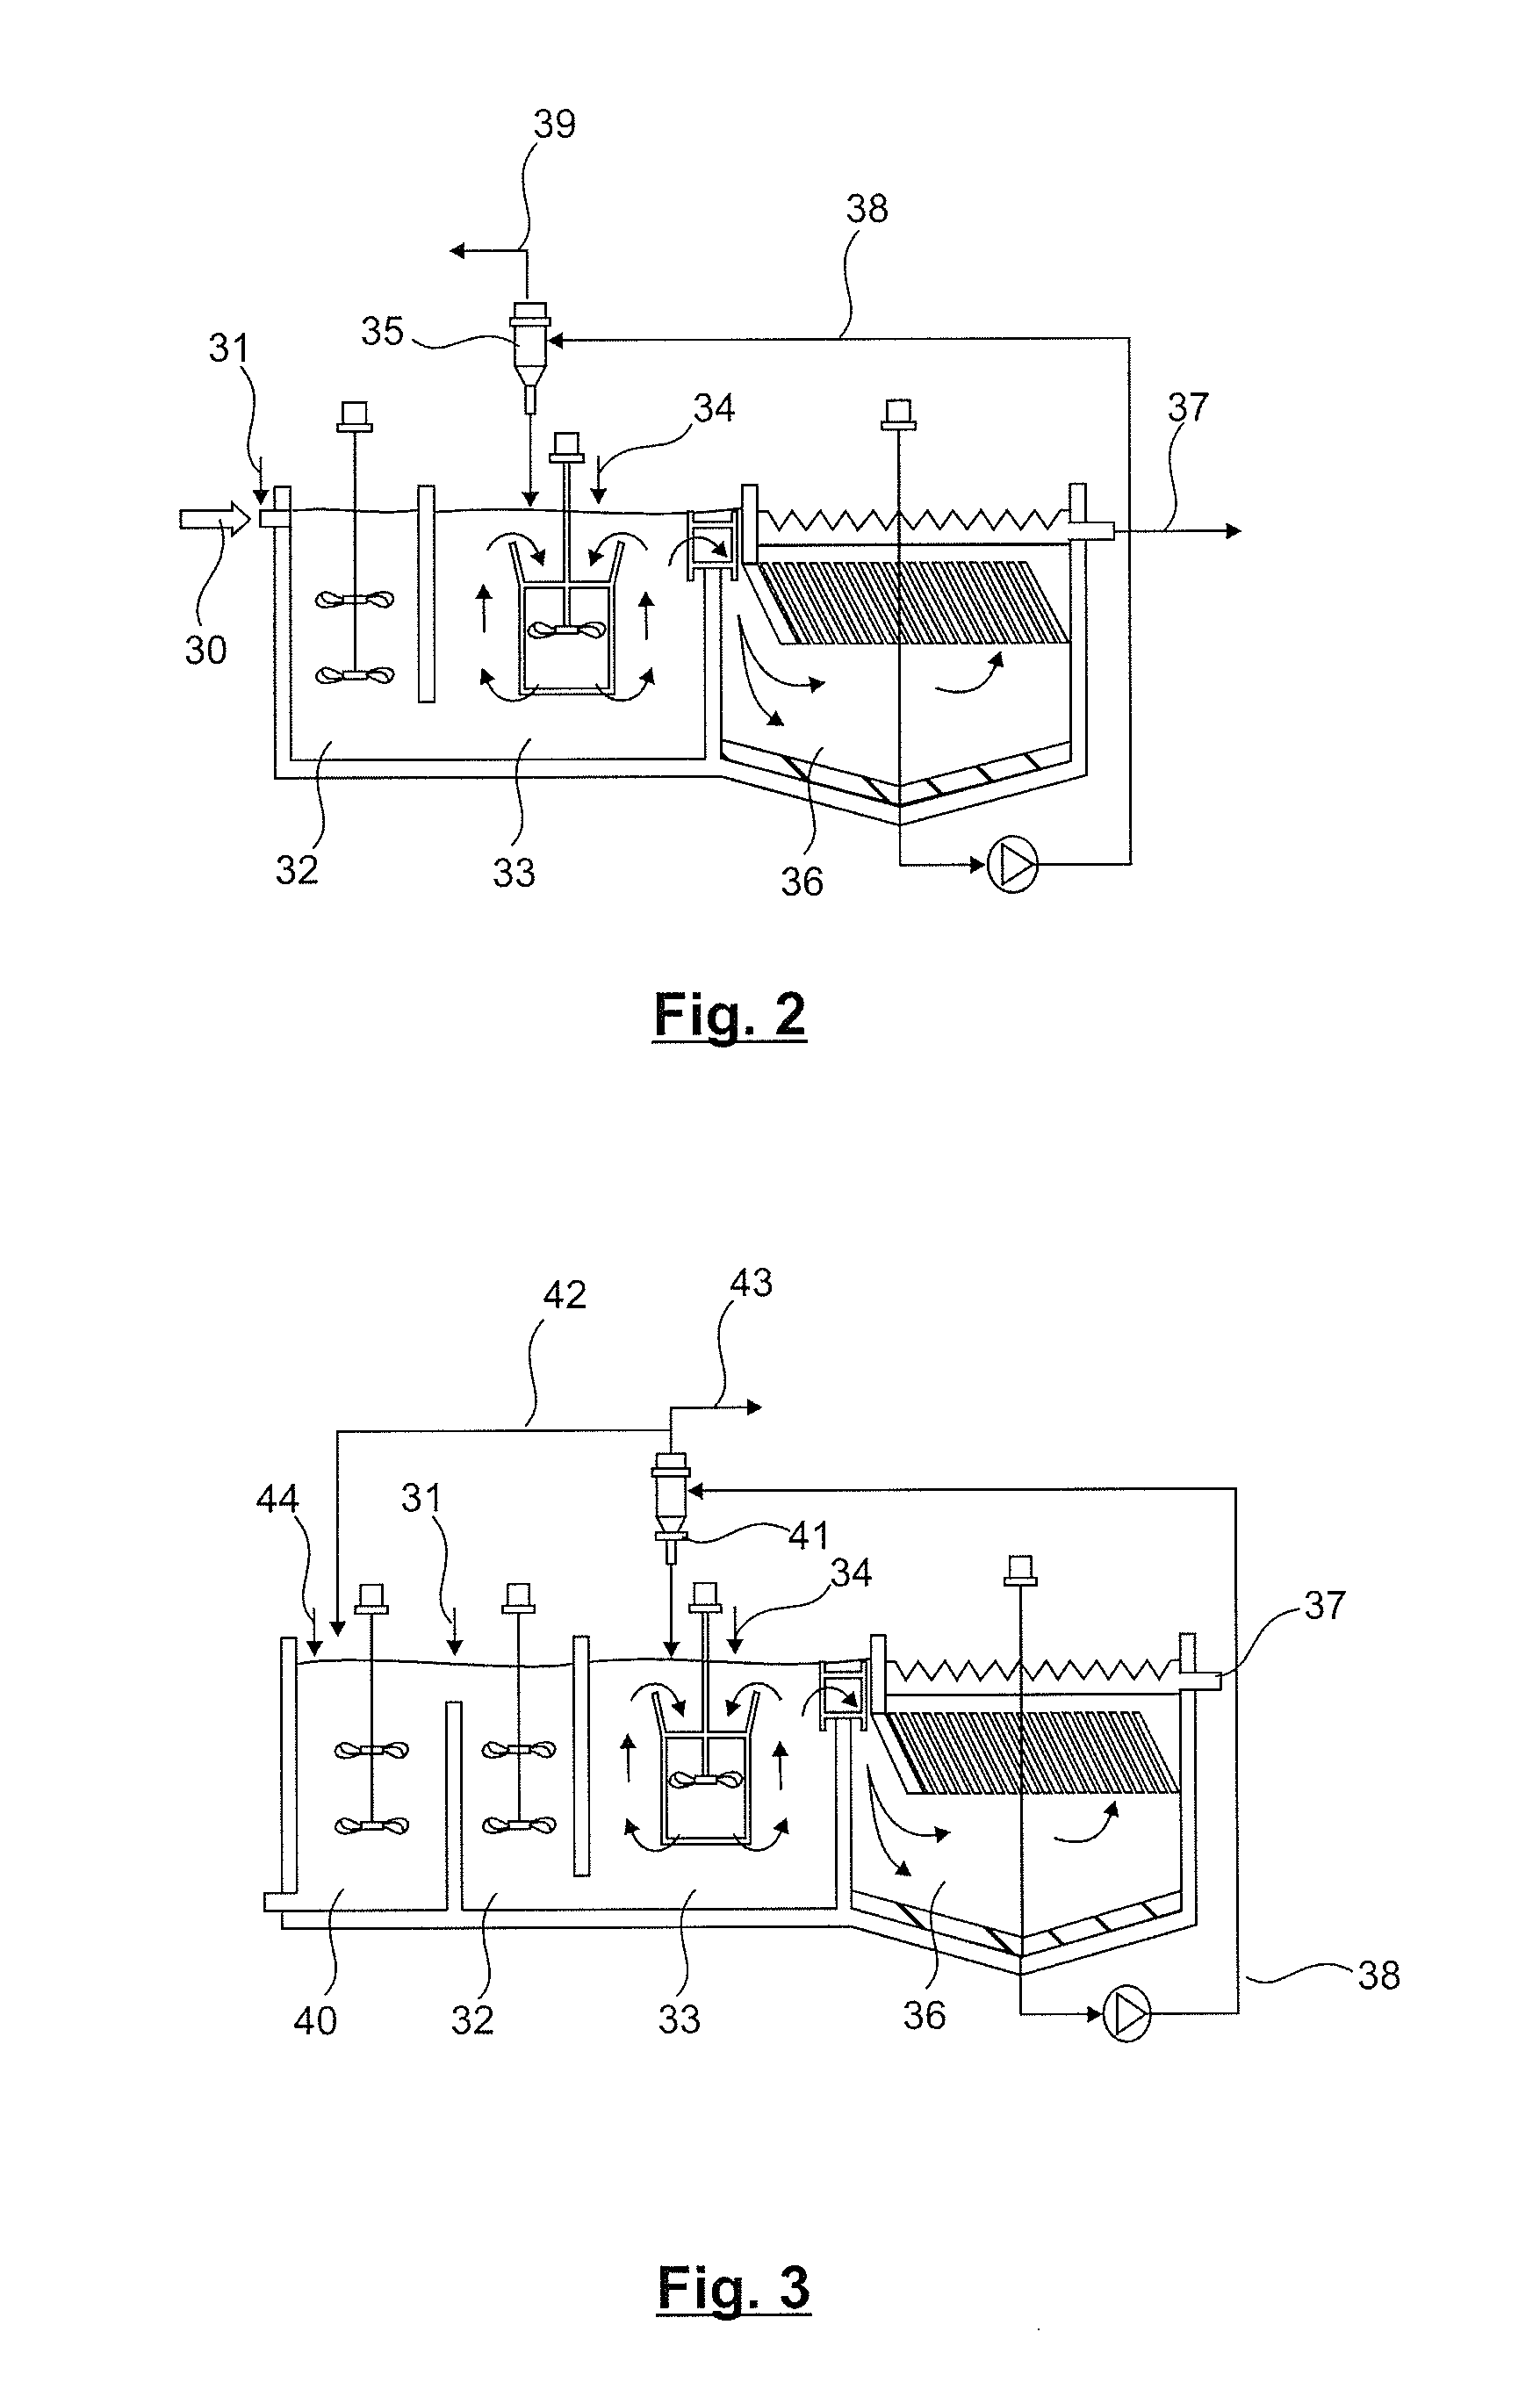 Process for Treating Water to be Treated by Clarification Comprising an Adsorption of a Portion of Clarified Water and a Clarification of a Mixture of Adsorbed Clarified Water and Water to be Treated